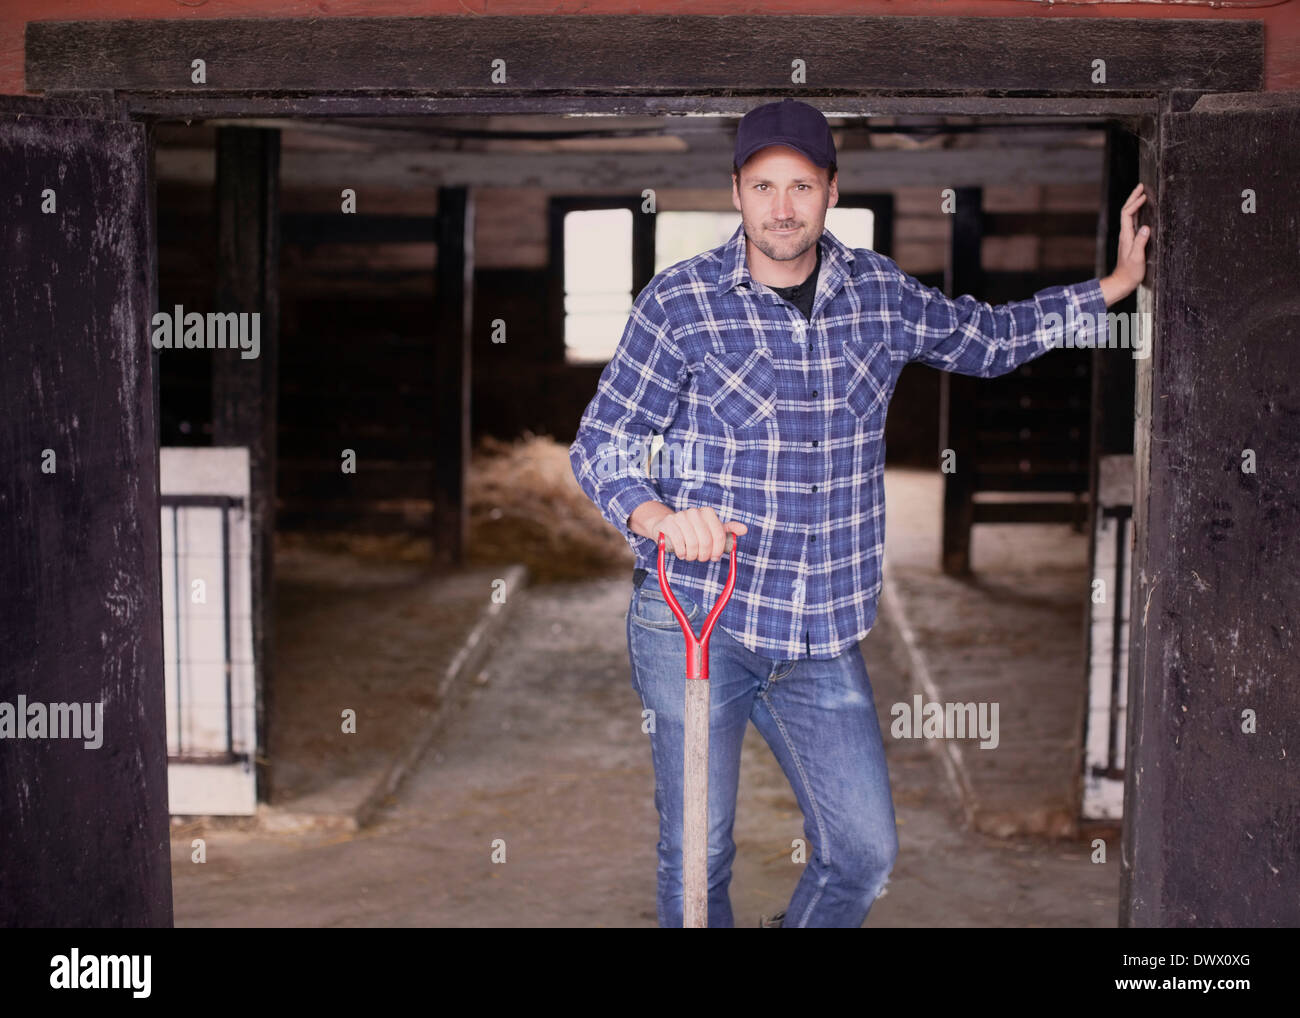 Portrait of confident farmer with pitchfork standing at the entrance of barn Stock Photo